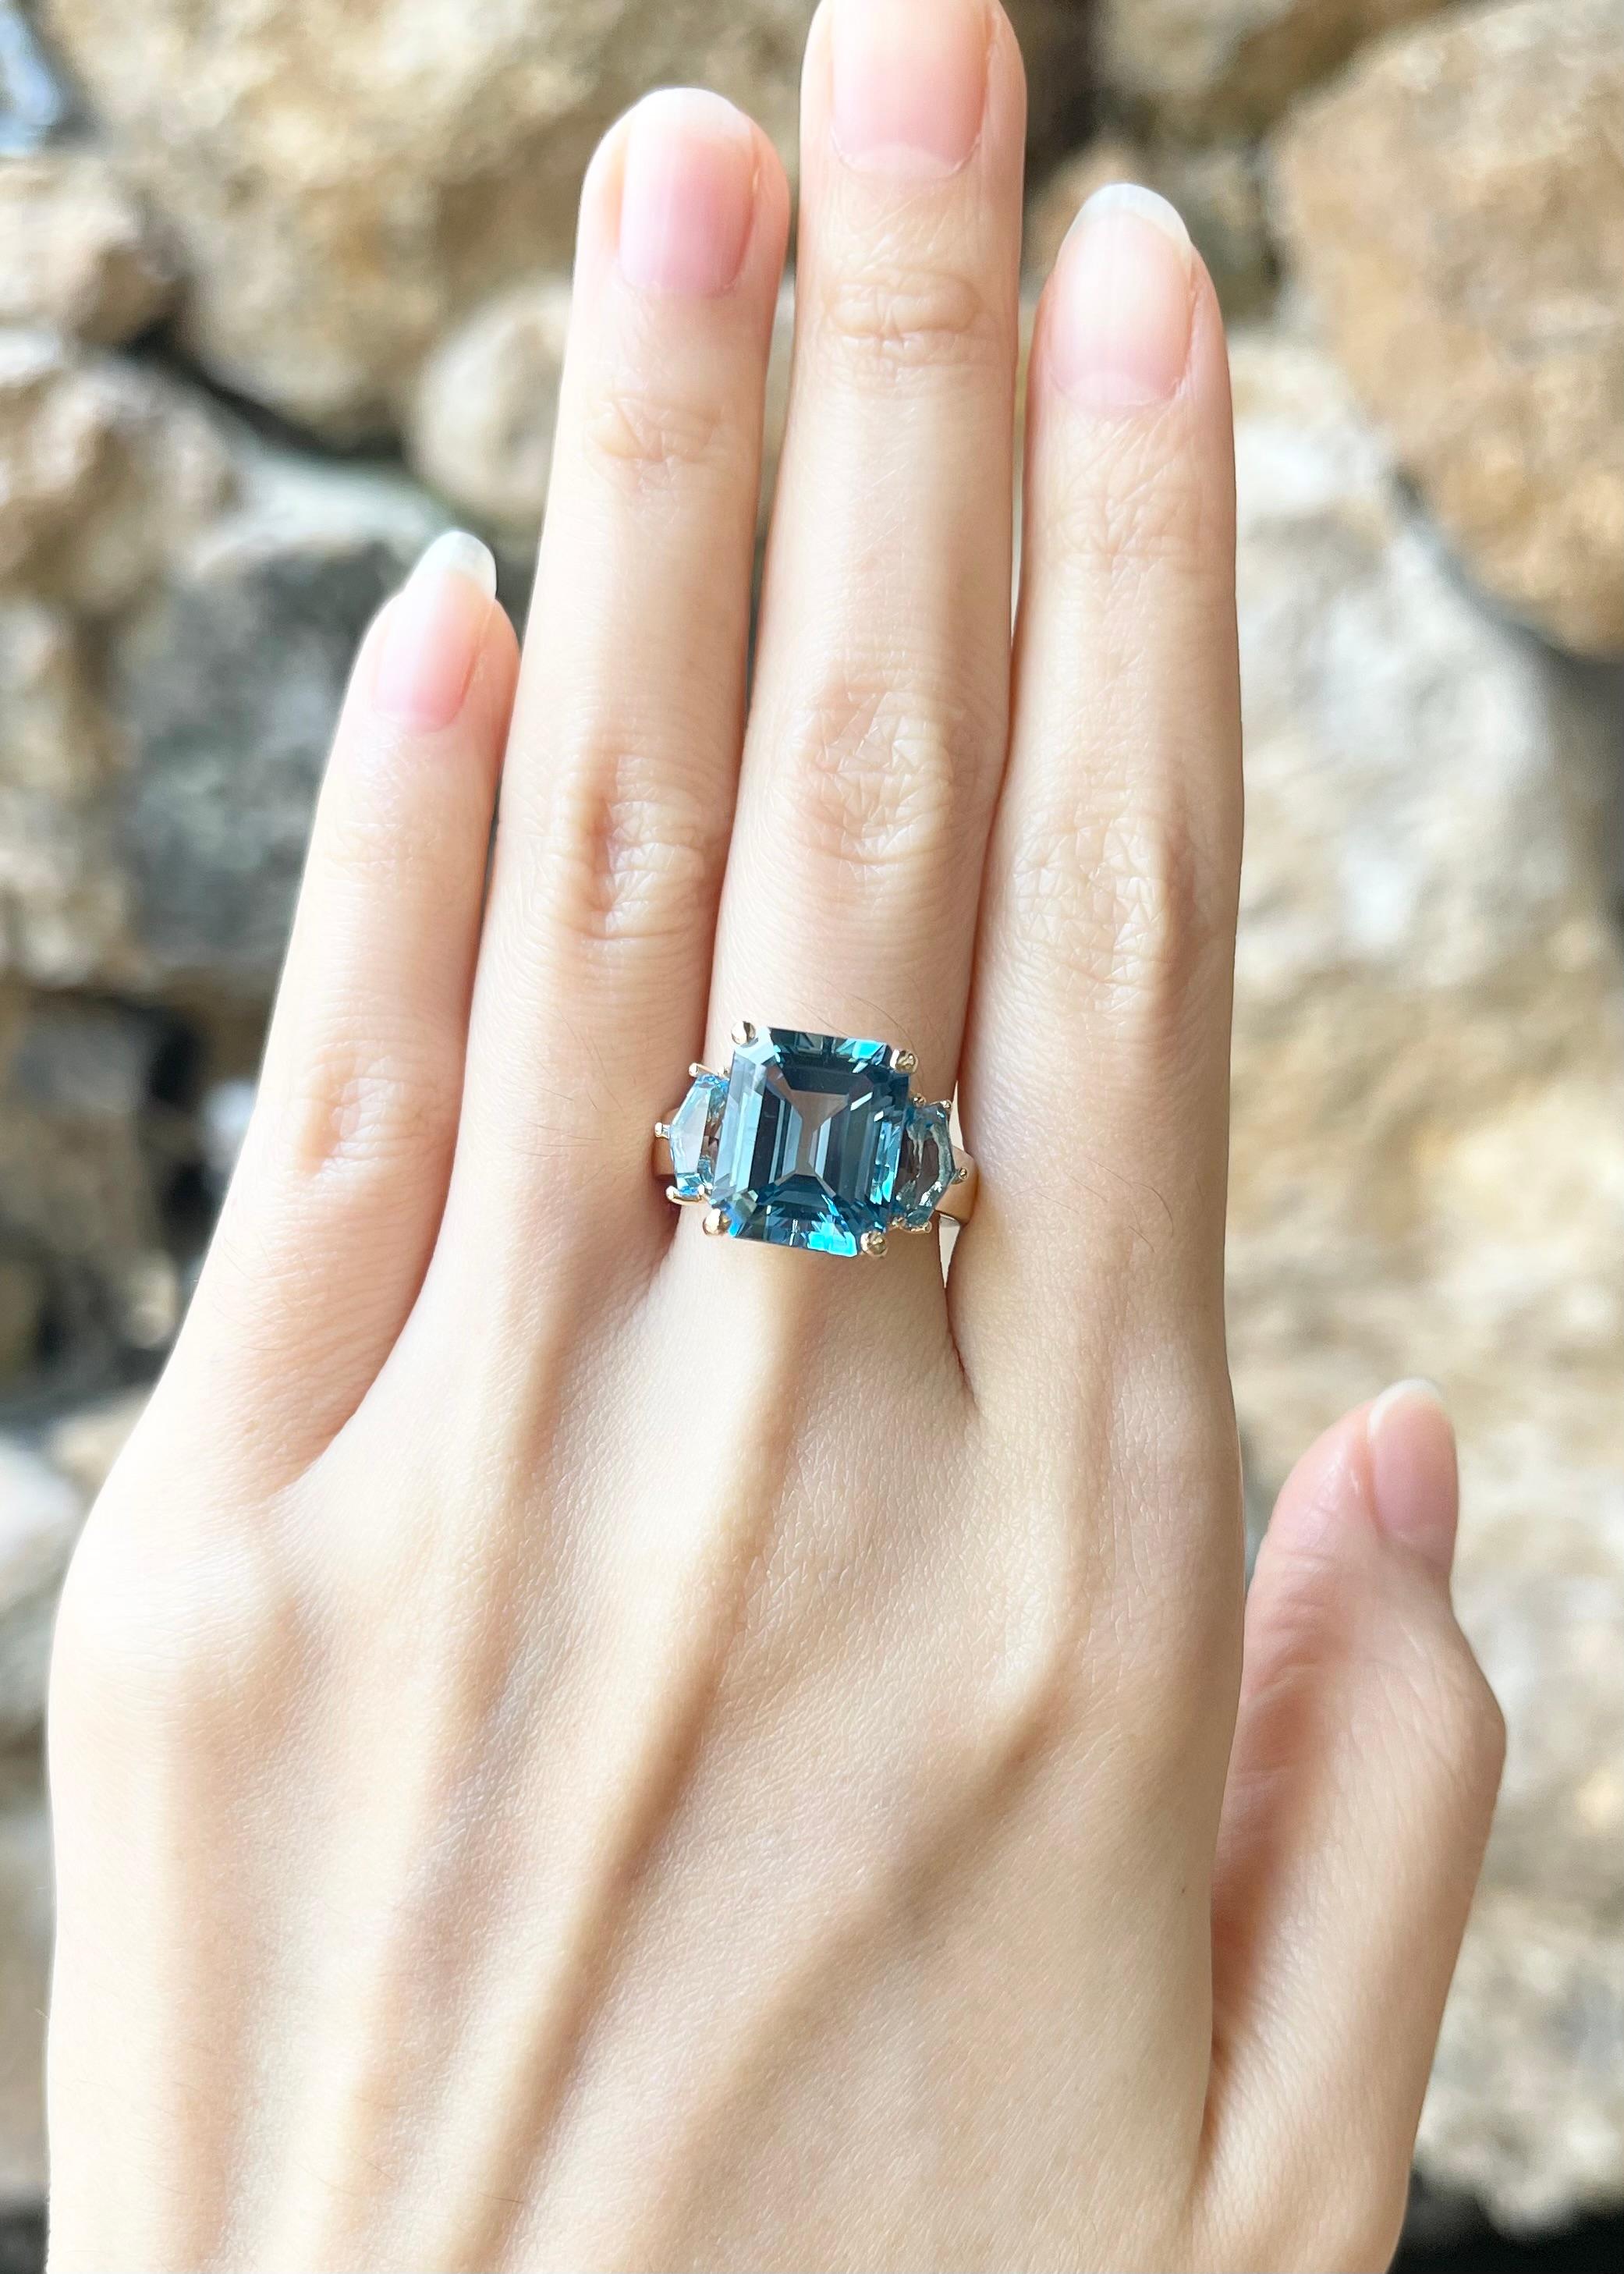 Blue Topaz 8.24 carats, Blue Topaz 2.33 carats Ring set in 14K Gold Settings

Width:  1.7 cm 
Length: 1.2 cm
Ring Size: 53
Total Weight: 7.30 grams

